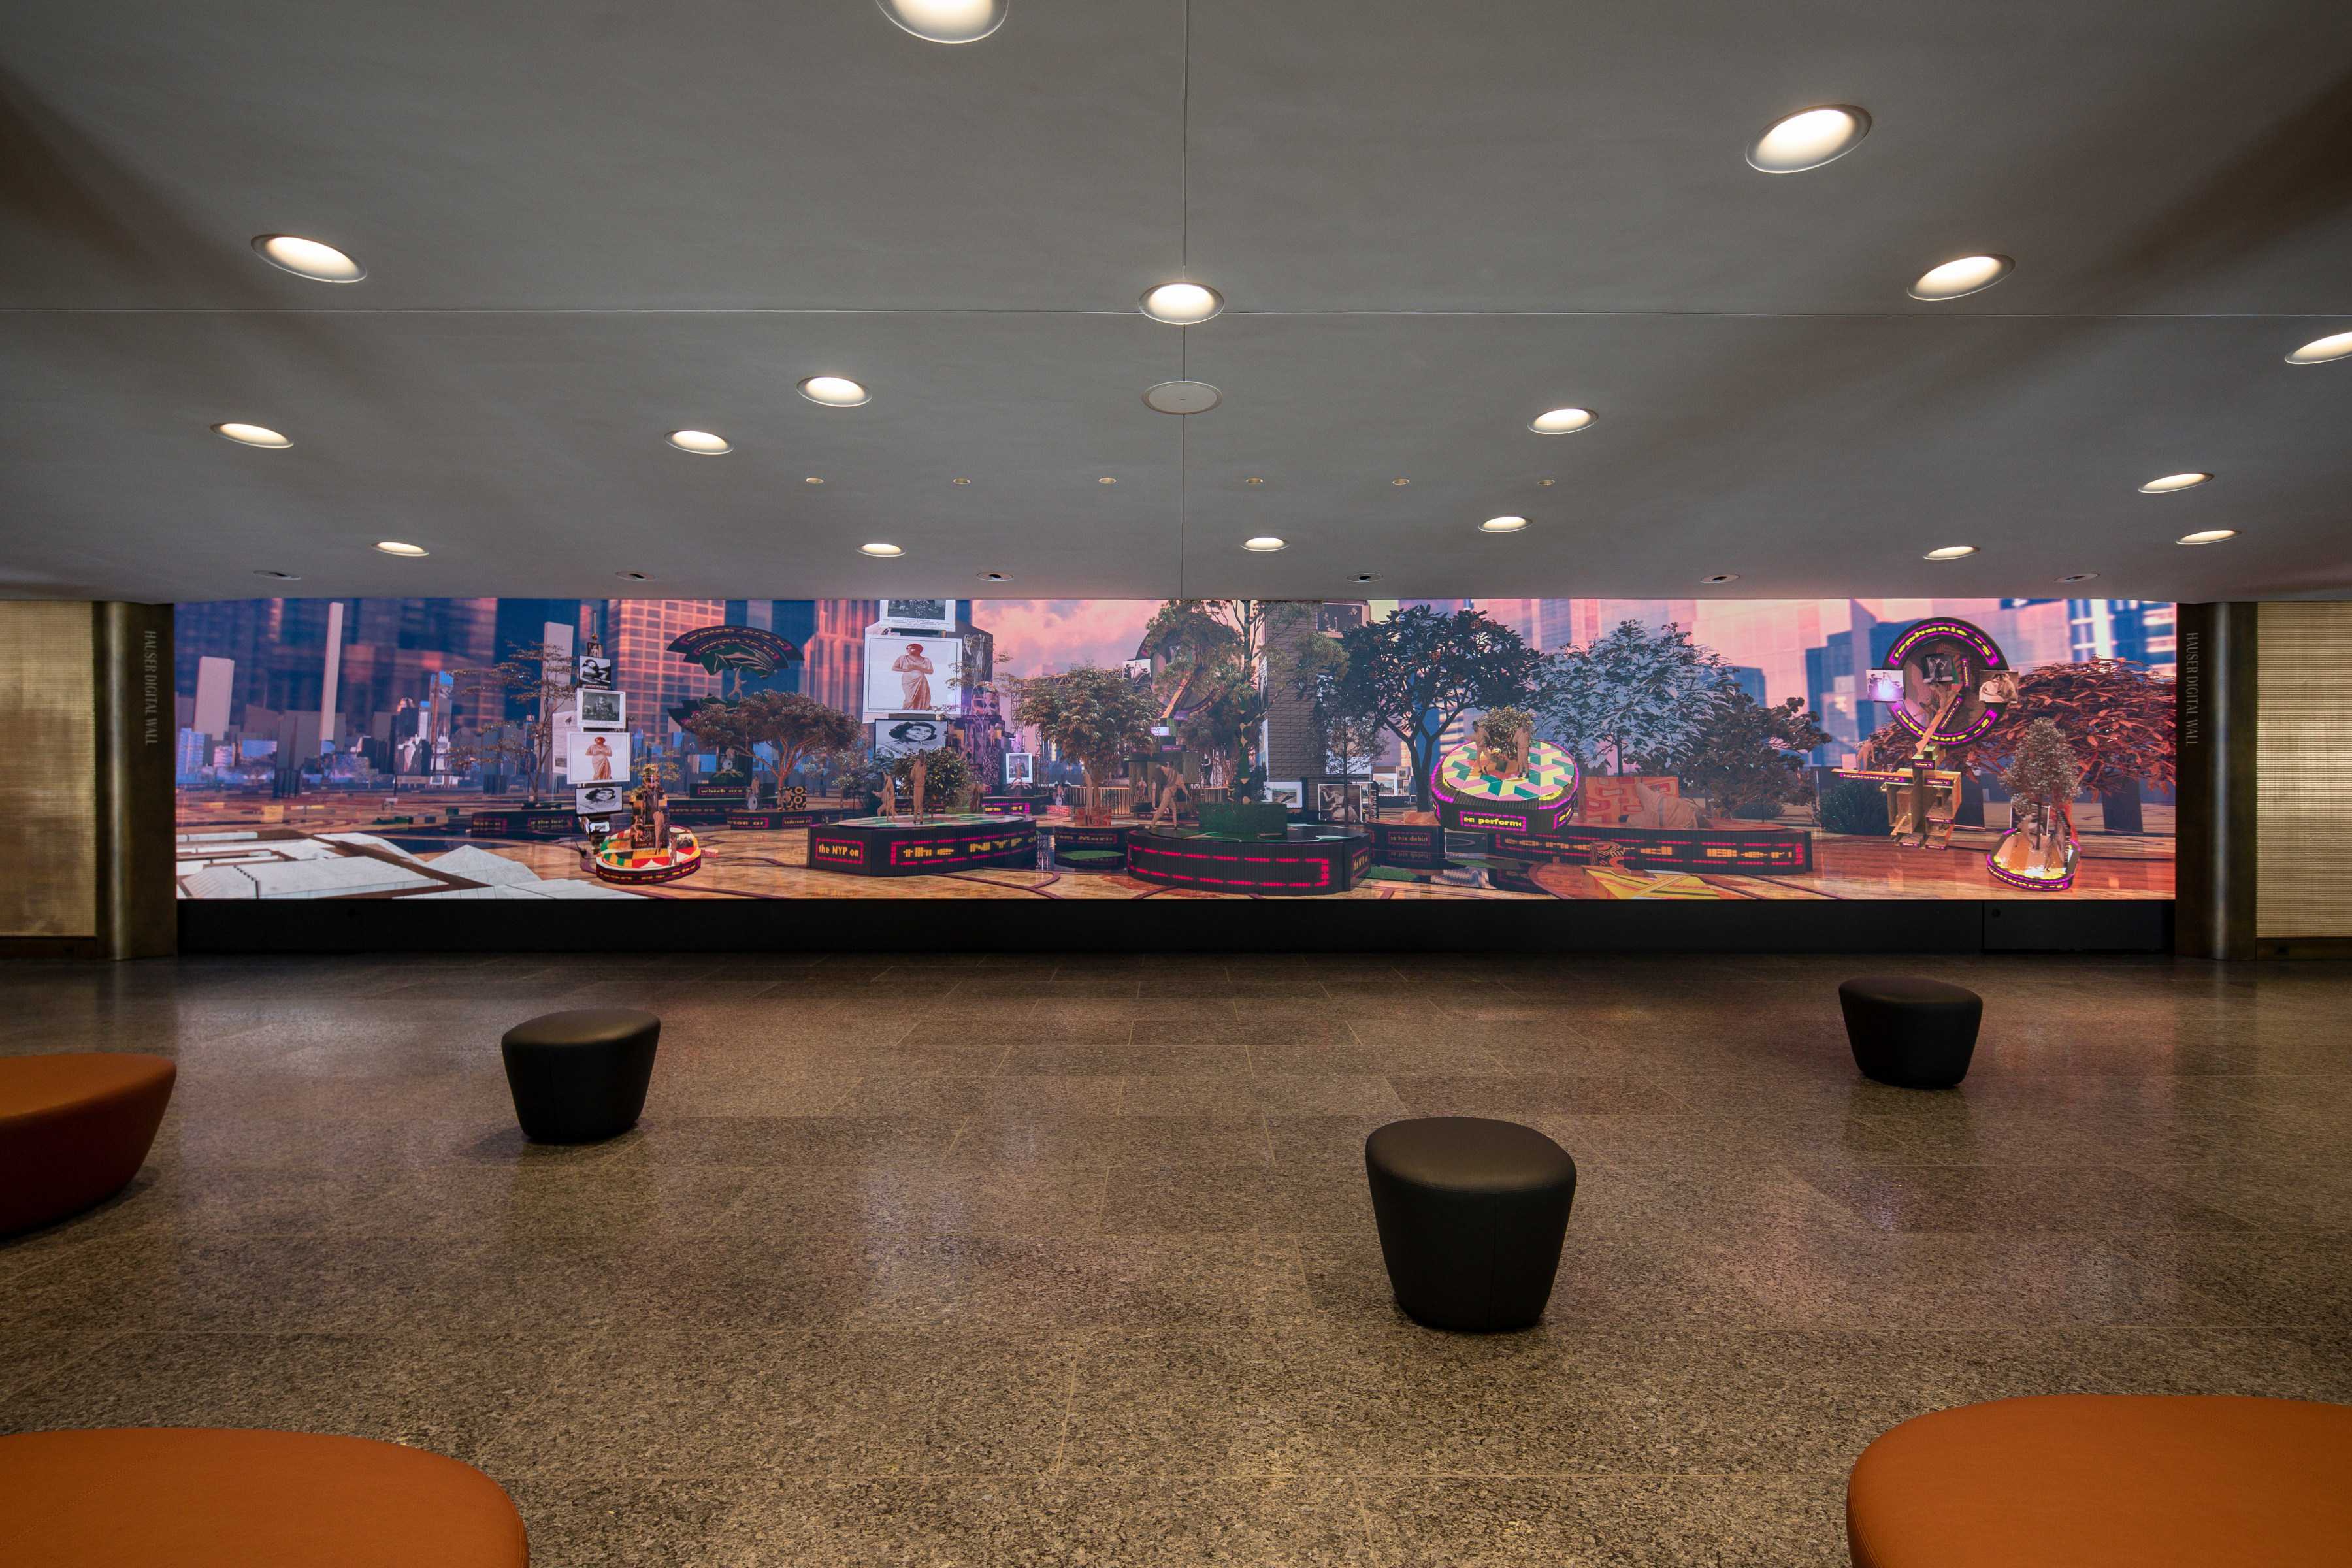 JACOLBY SATTERWHITE Installation view of&nbsp;An Eclectic Dance to the Music of Time&nbsp;at David Geffen Hall, commissioned by Lincoln Center&nbsp;for the Performing&nbsp;Arts in&nbsp;collaboration with The Studio Museum in Harlem and Public Art Fund, New York, 2022